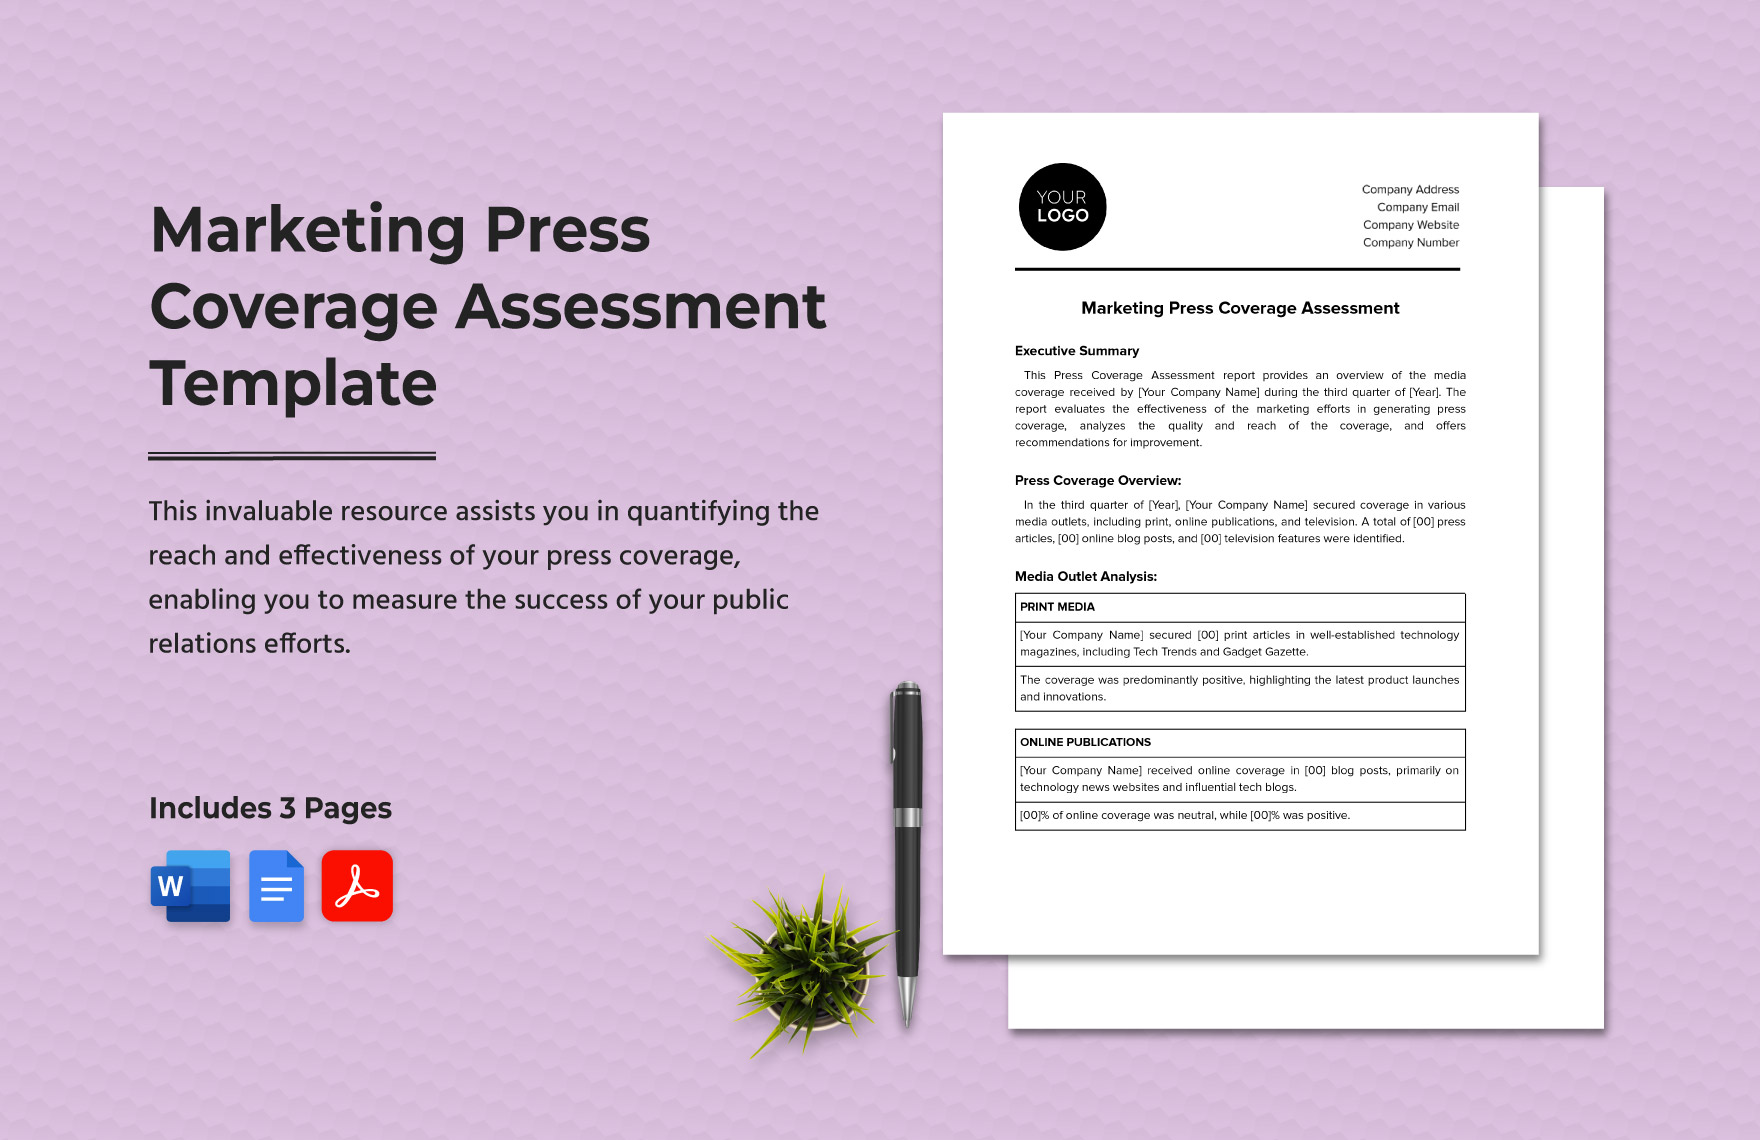 Marketing Press Coverage Assessment Template in Word, Google Docs, PDF